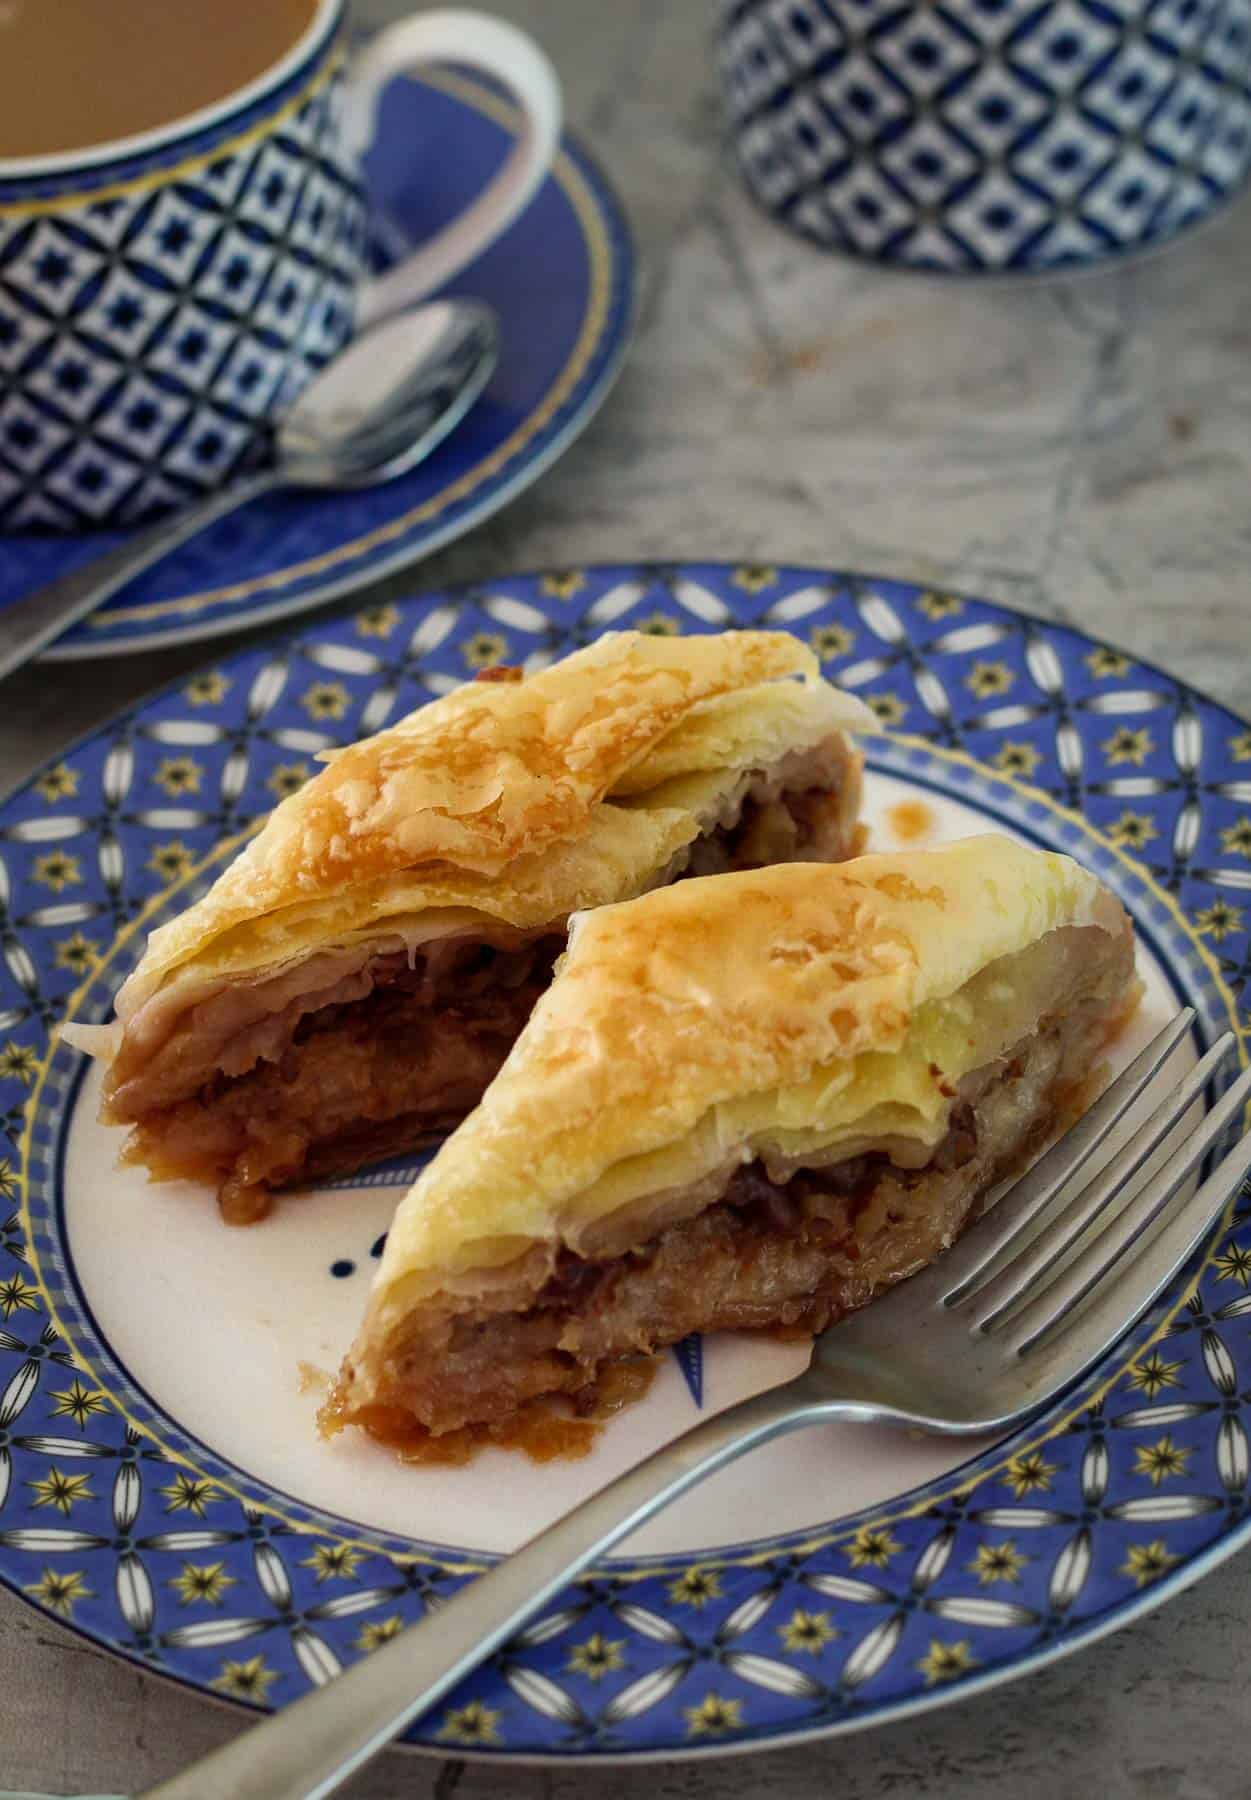 A plate with 2 slices of baklava and a fork. On the background there's a partial view of a cup of coffee.